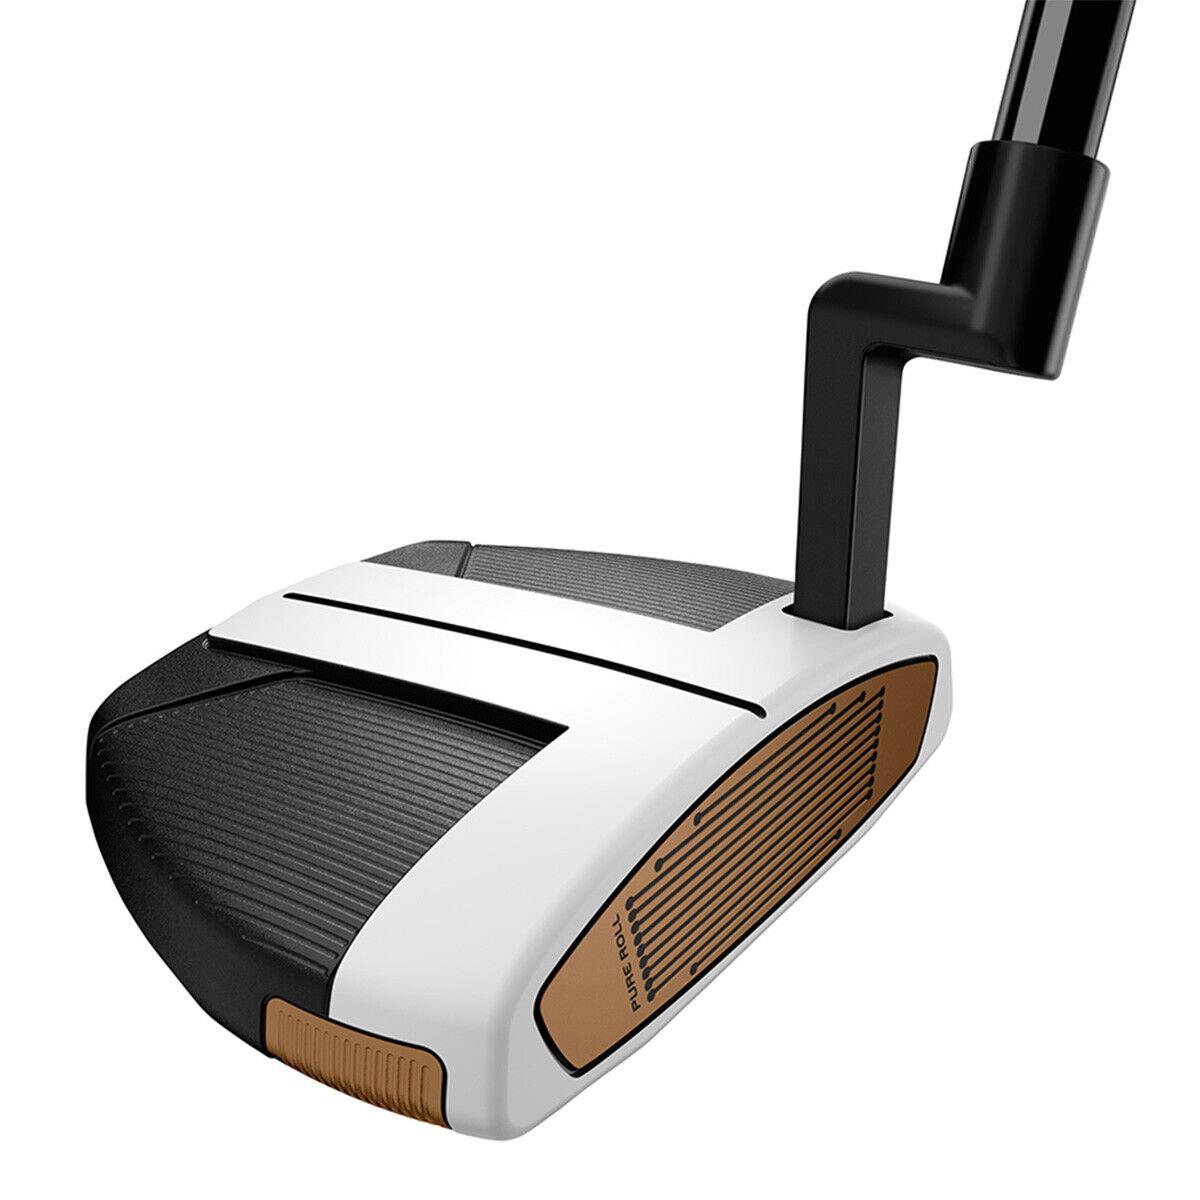 Taylormade Spider Fcg Putter Choose LH / RH Length Head Model Head Cover